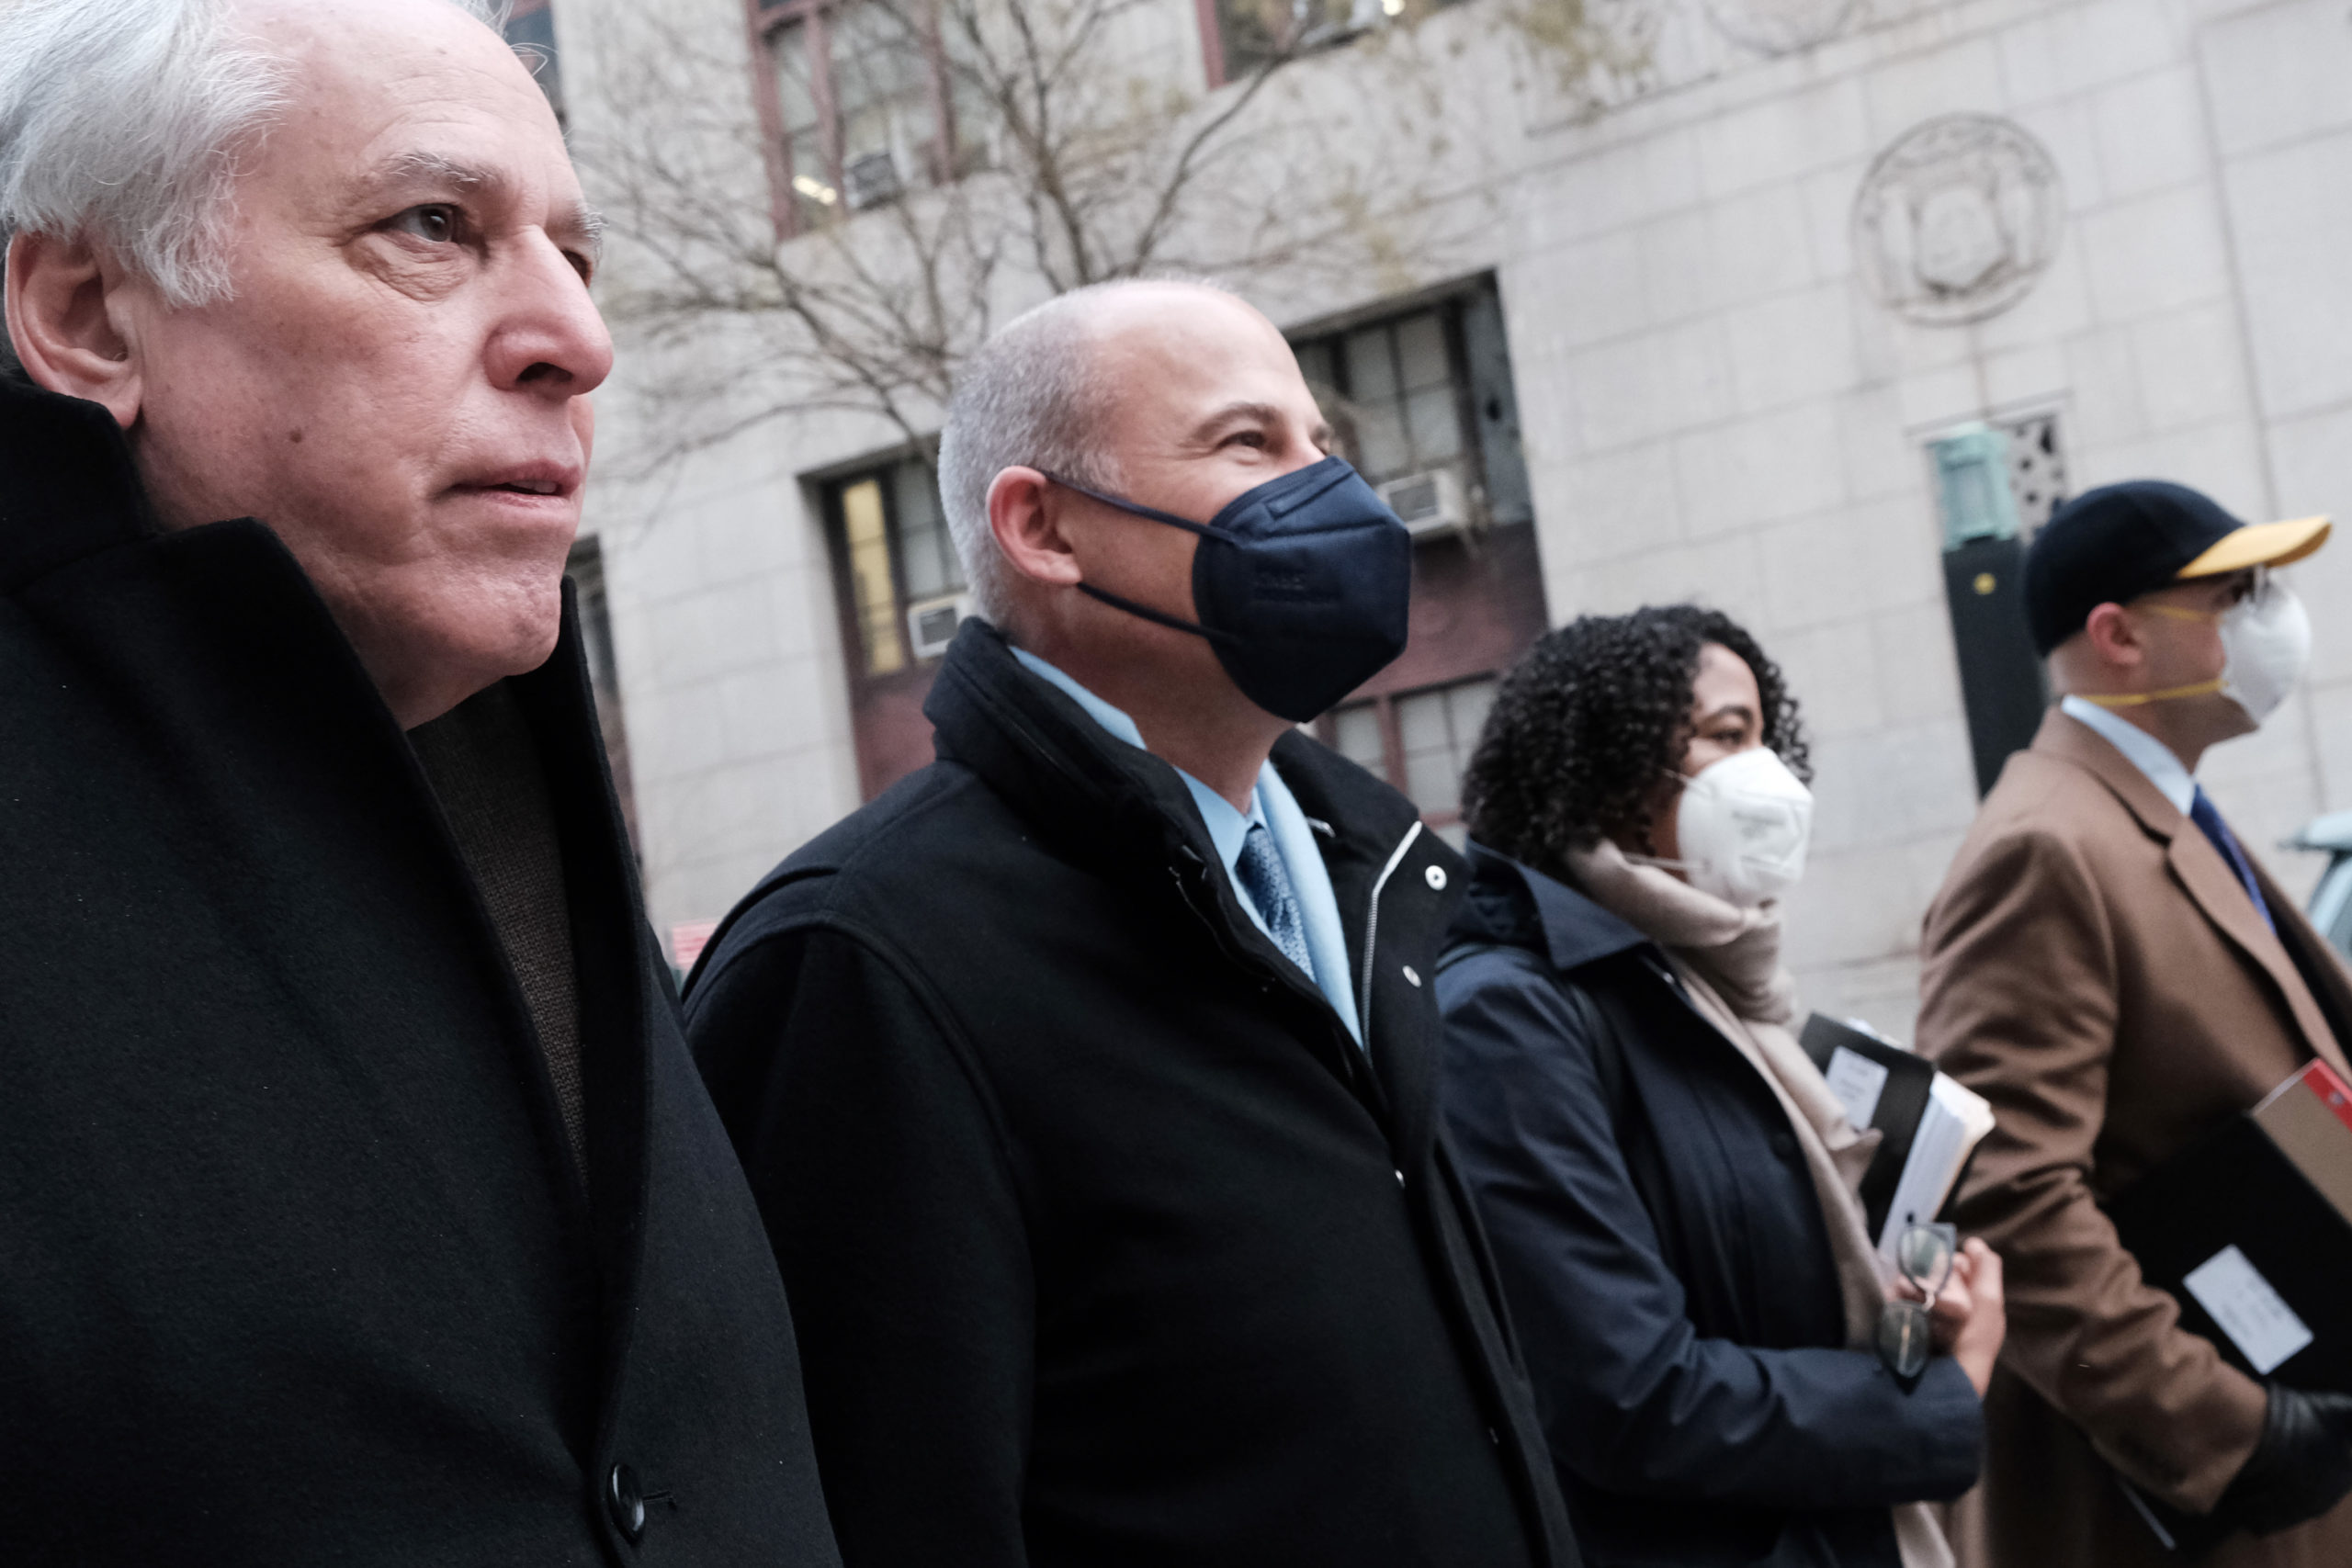 NEW YORK, NEW YORK - JANUARY 24: Michael Avenatti (C) arrives at a federal court in Manhattan for a criminal case in which he is accused of stealing money from his former client, adult-film star Stormy Daniels on January 24, 2022 in New York City. The celebrity lawyer had previously represented Daniels in her attempt to terminate a deal that prevented her from revealing allegations of an affair with former President Donald Trump. Avenatti is accused of stealing the advance on Stormy Daniels’ 2018 memoir. (Photo by Spencer Platt/Getty Images)